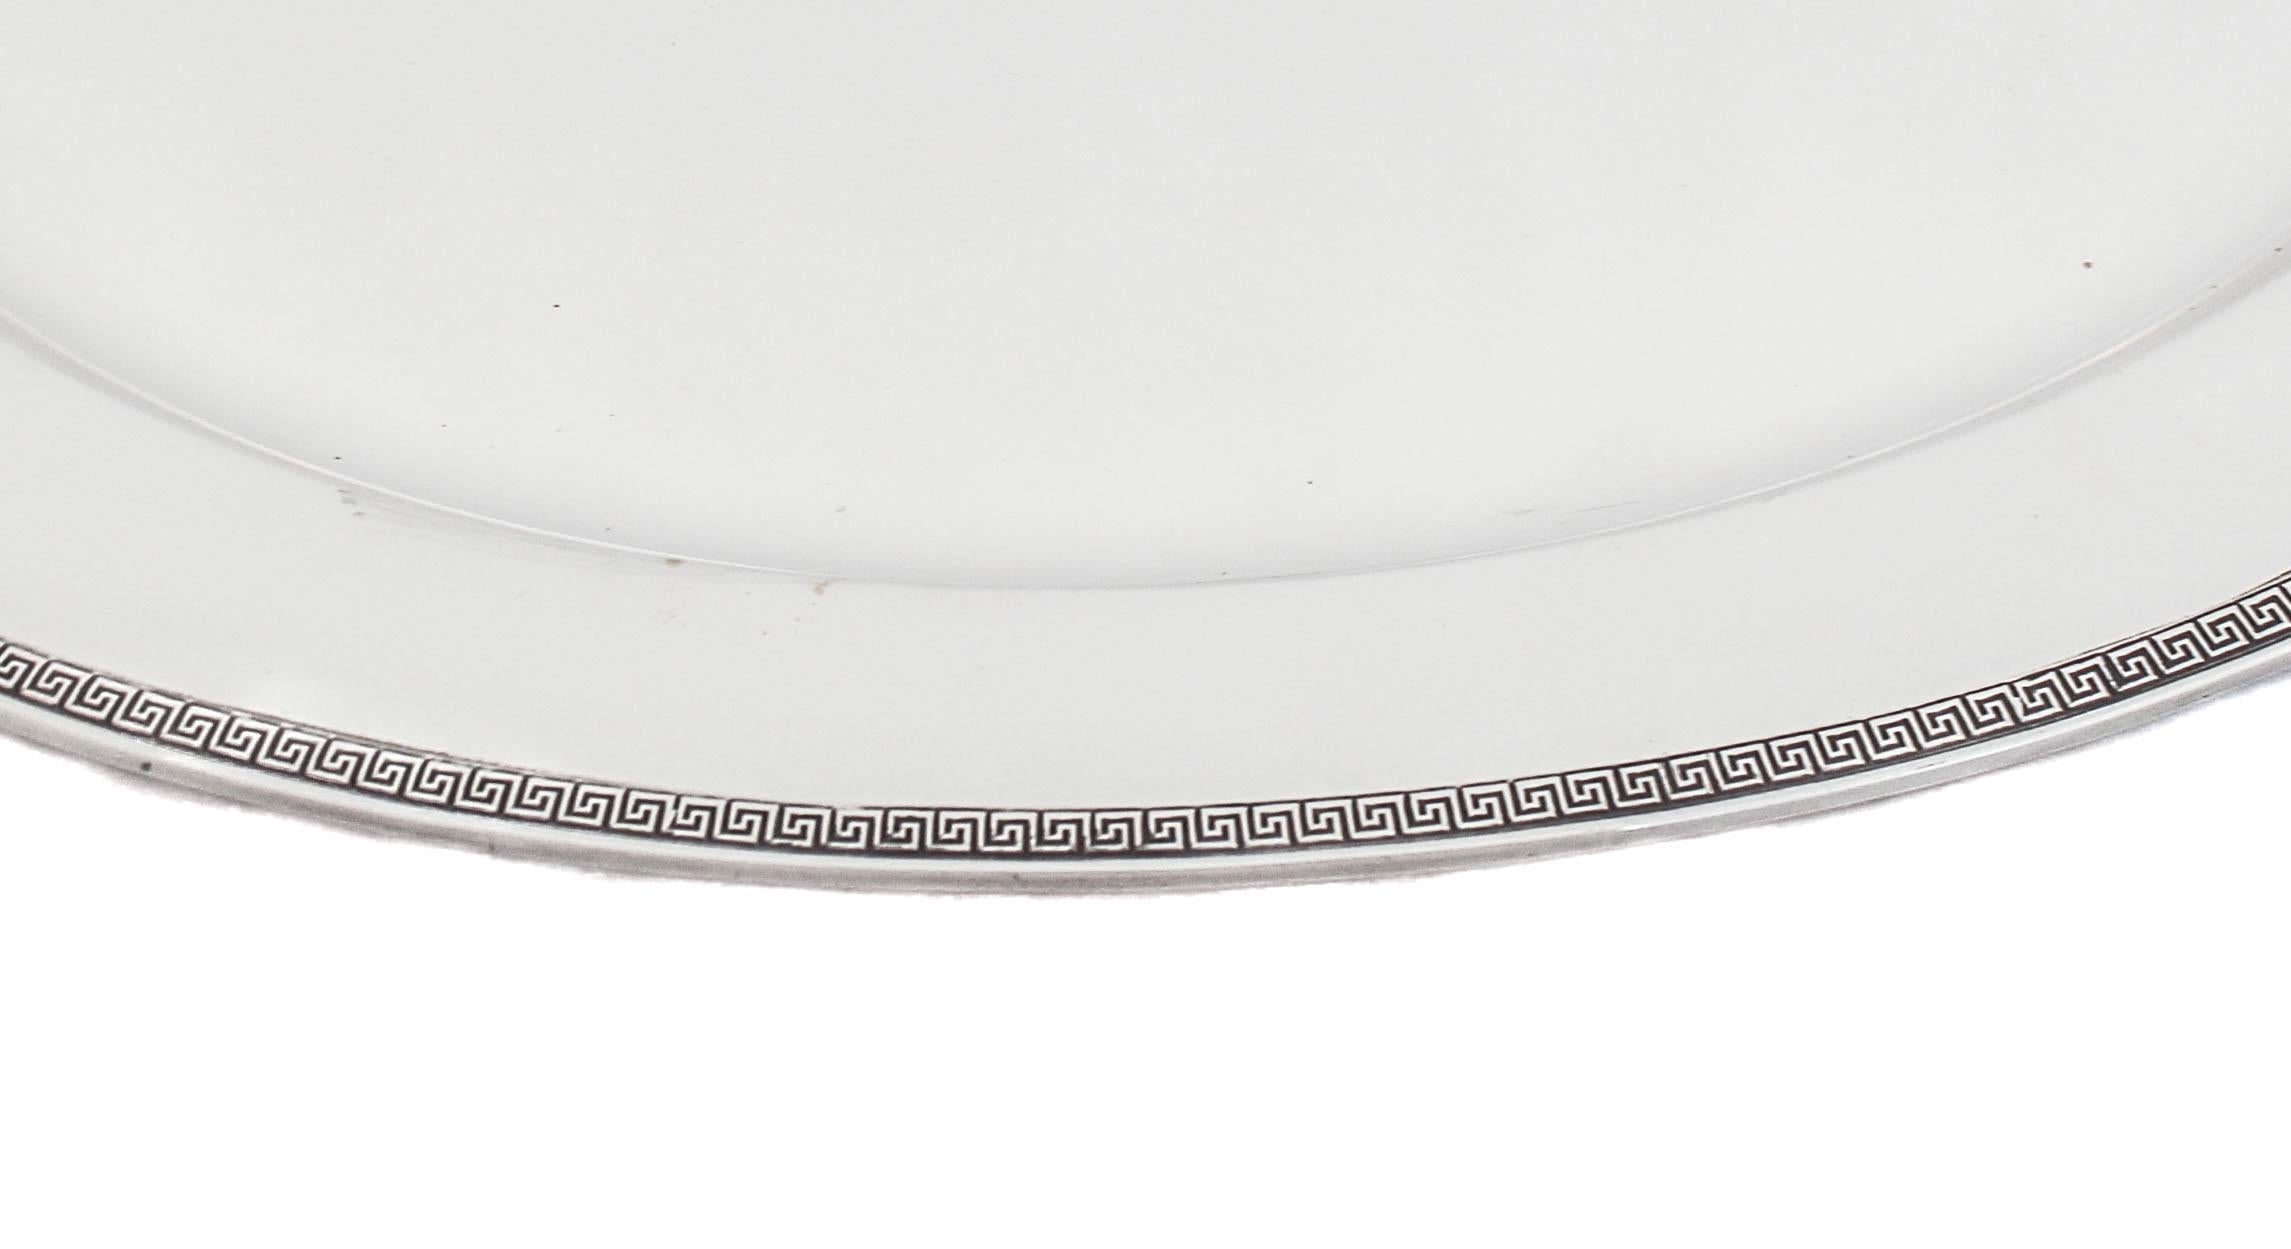 Being offered is a sterling silver platter by Gorham Silversmiths of Providence Rhode Island in the “Etruscan” pattern, hallmarked 1930.  The Etruscan Key pattern is a Greco-Roman revival pattern featuring a symmetrical design that included a Greek